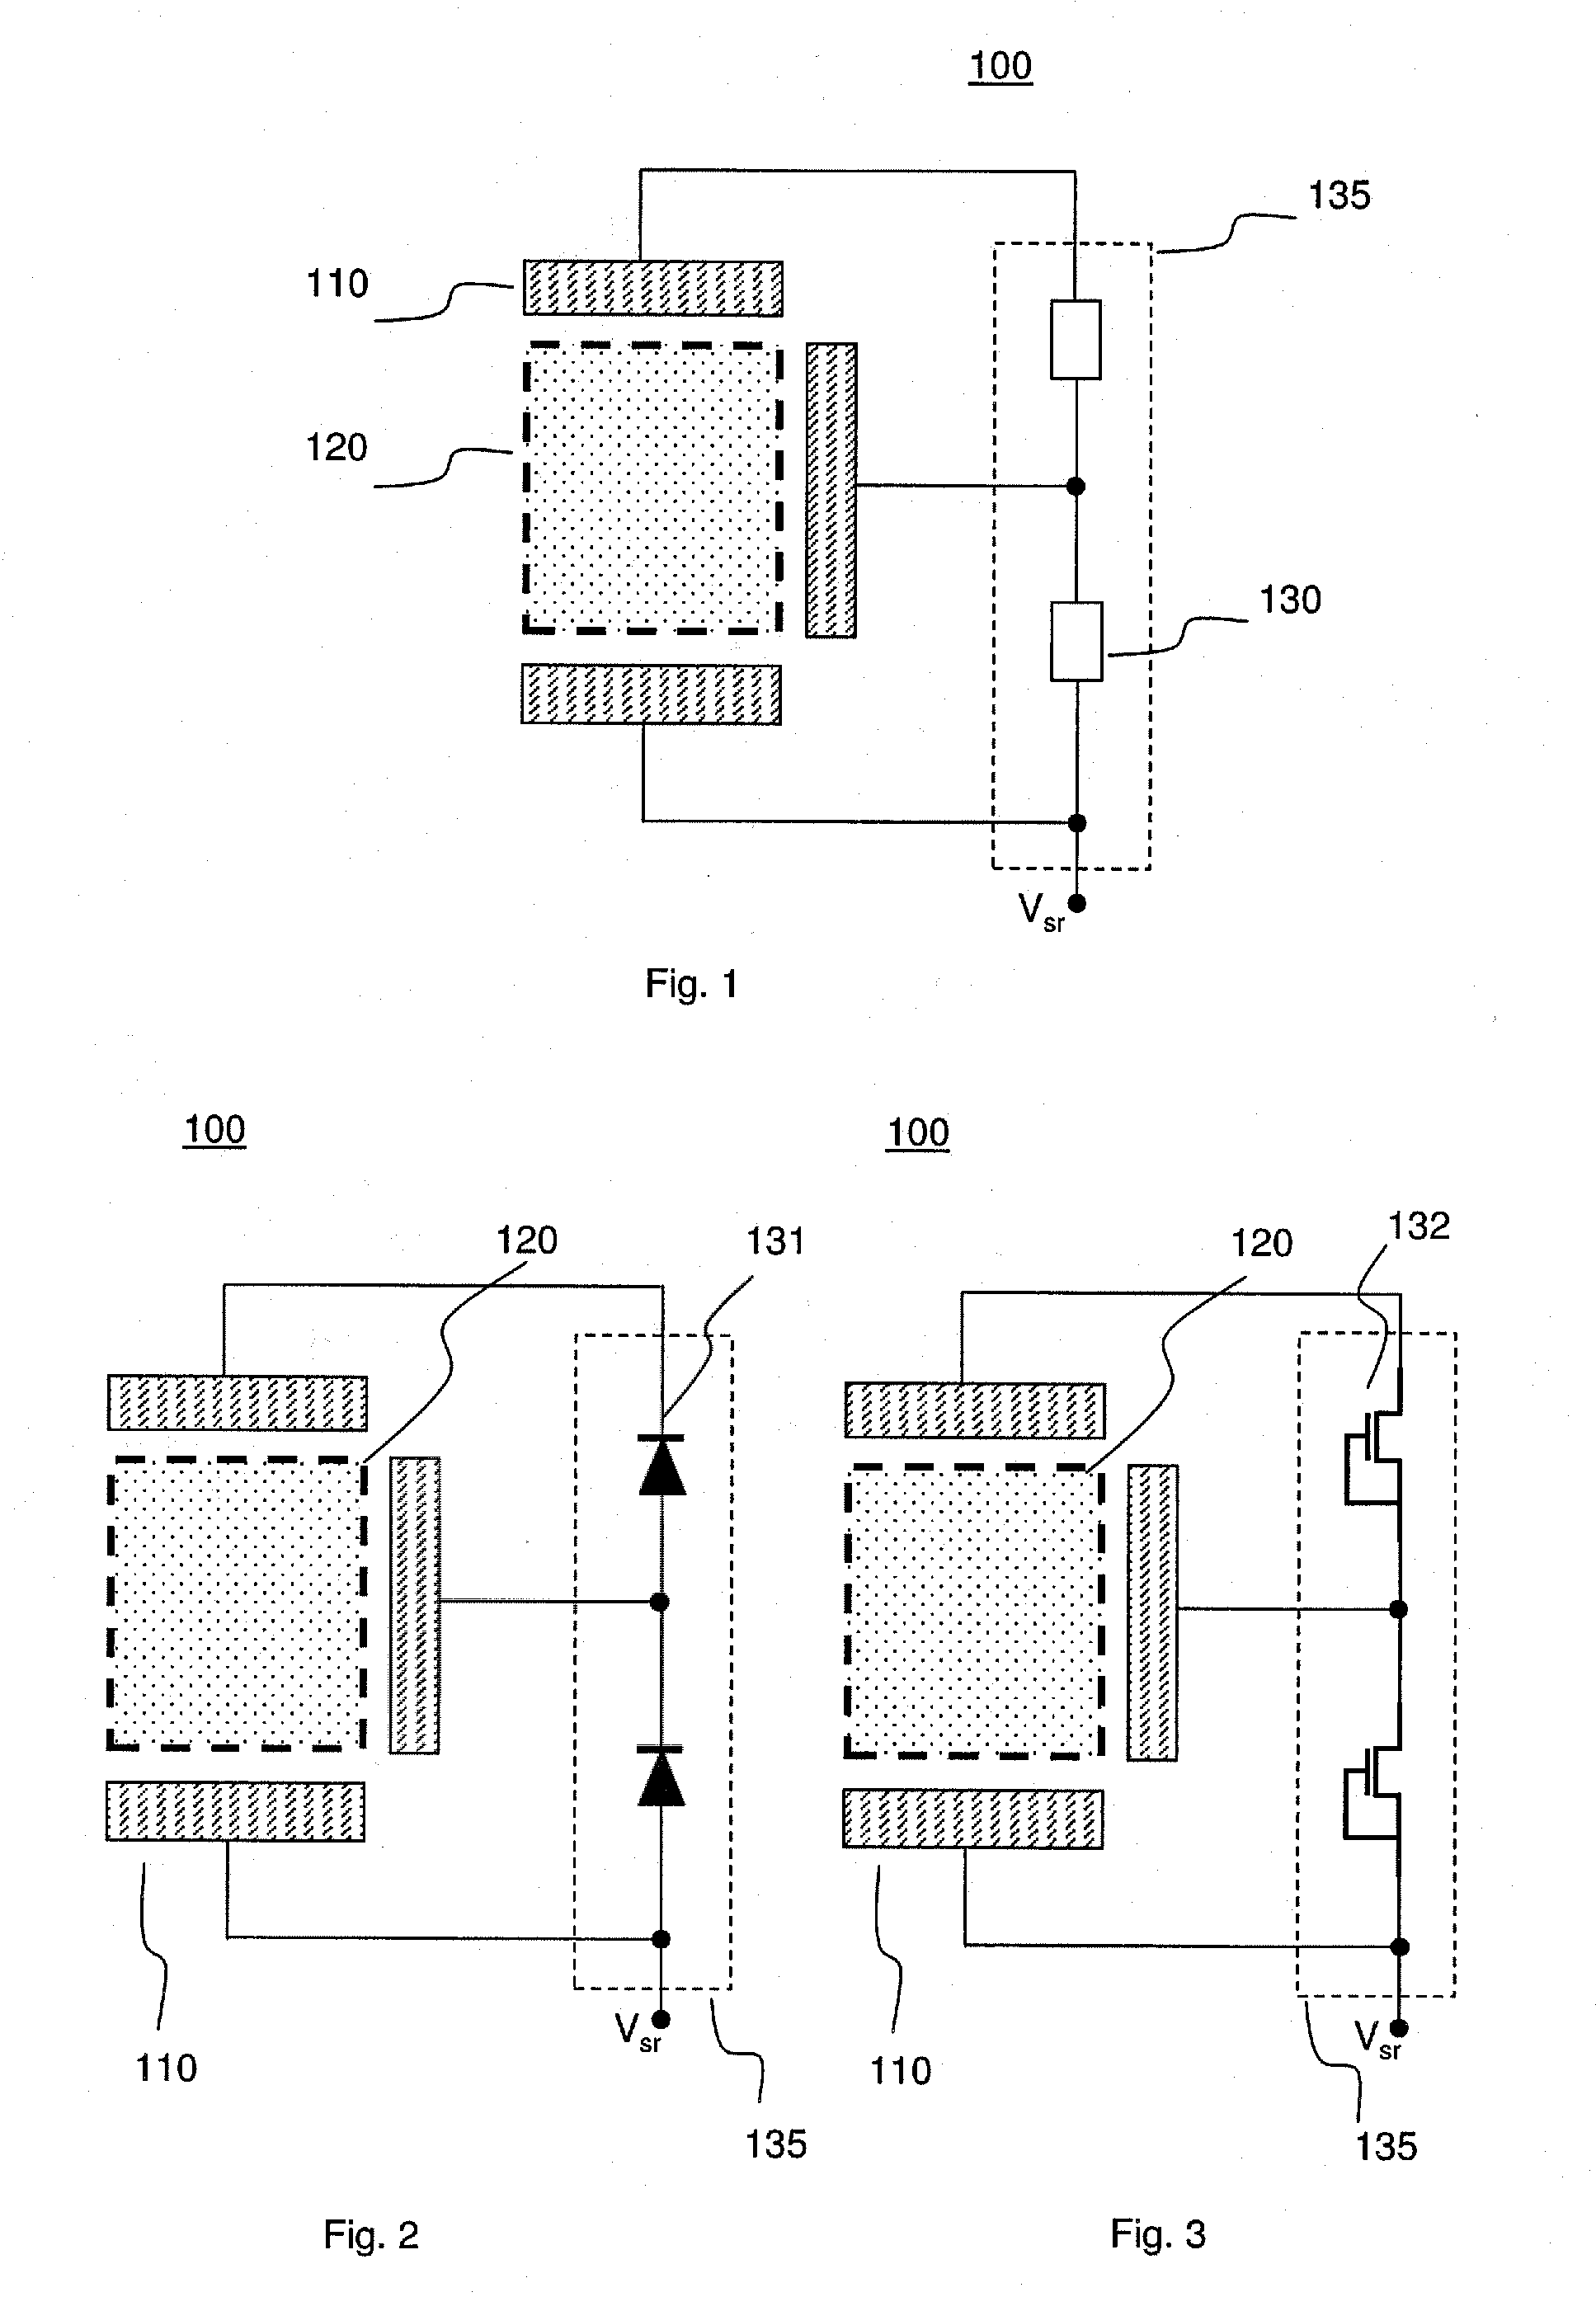 Sensing structure of alignment of a probe for testing integrated circuits